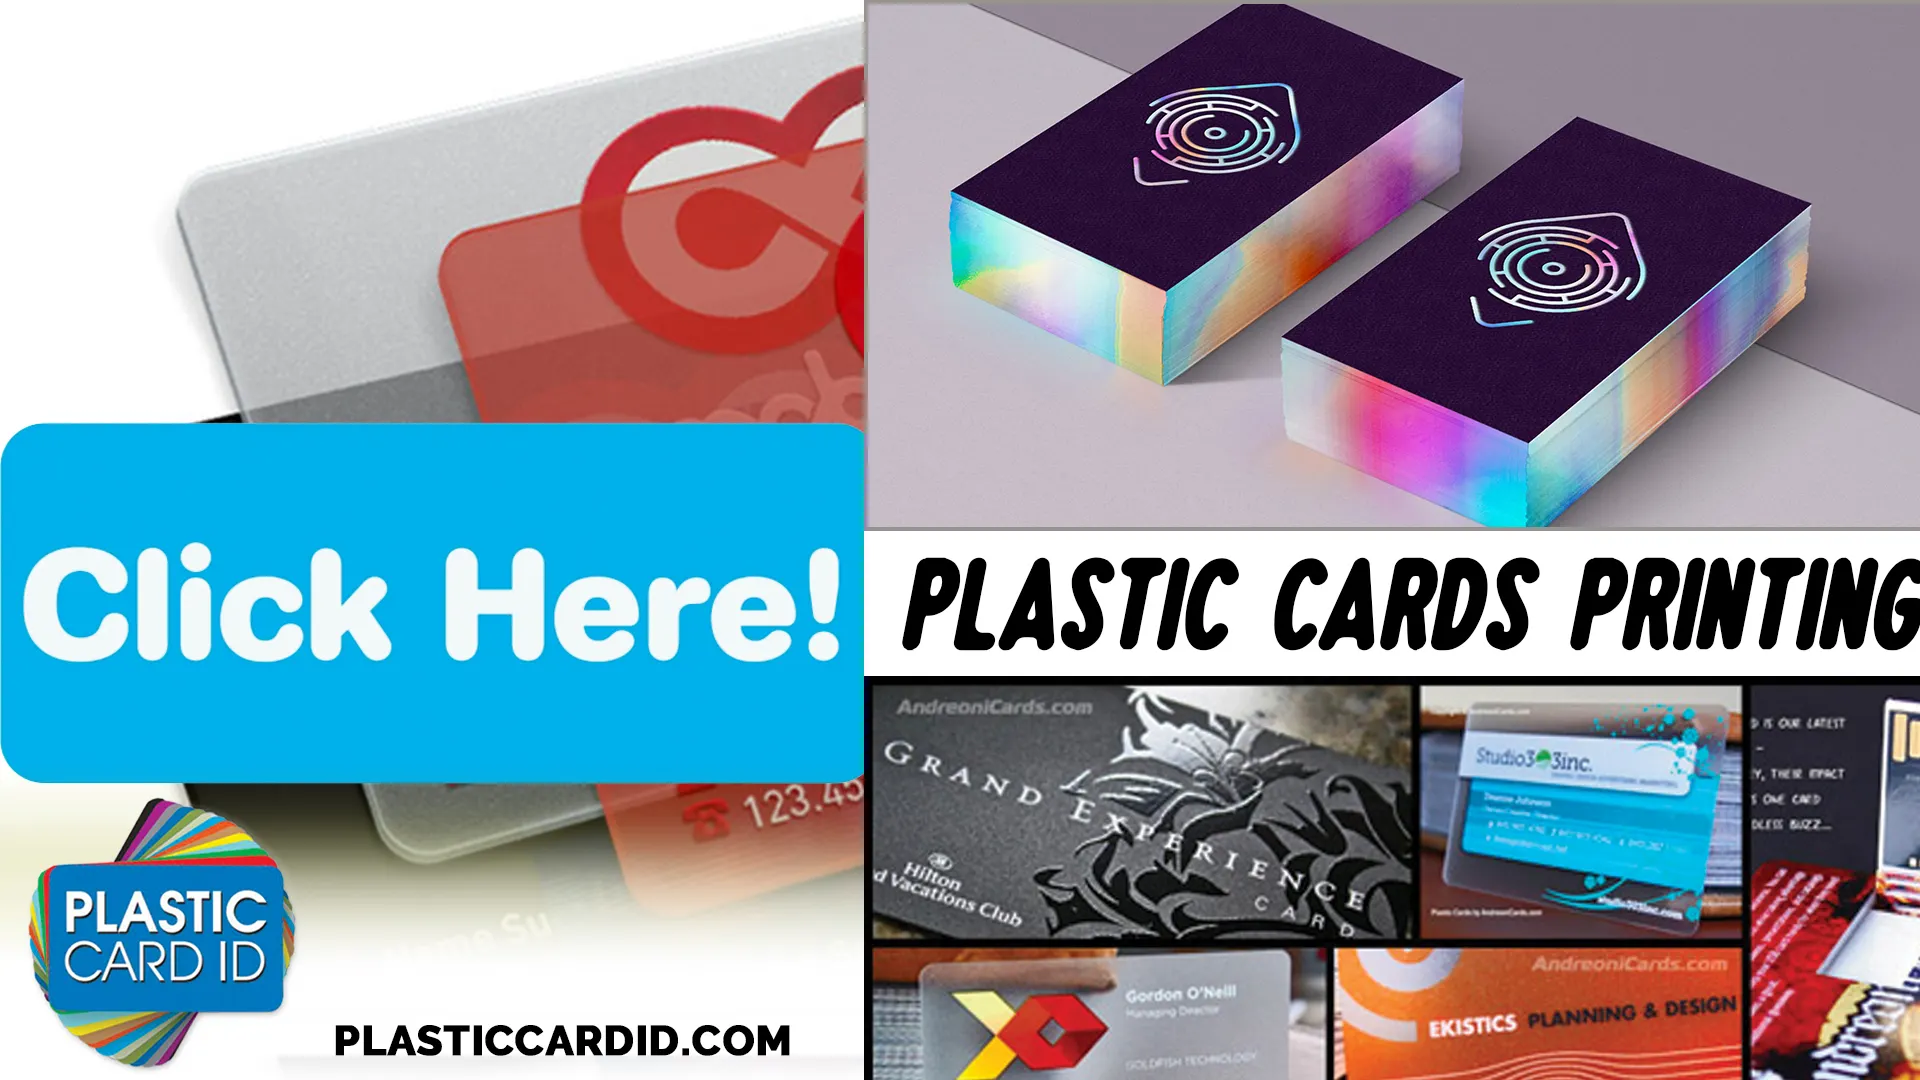 Caring for Your Card Printer is Easy with Plastic Card ID
